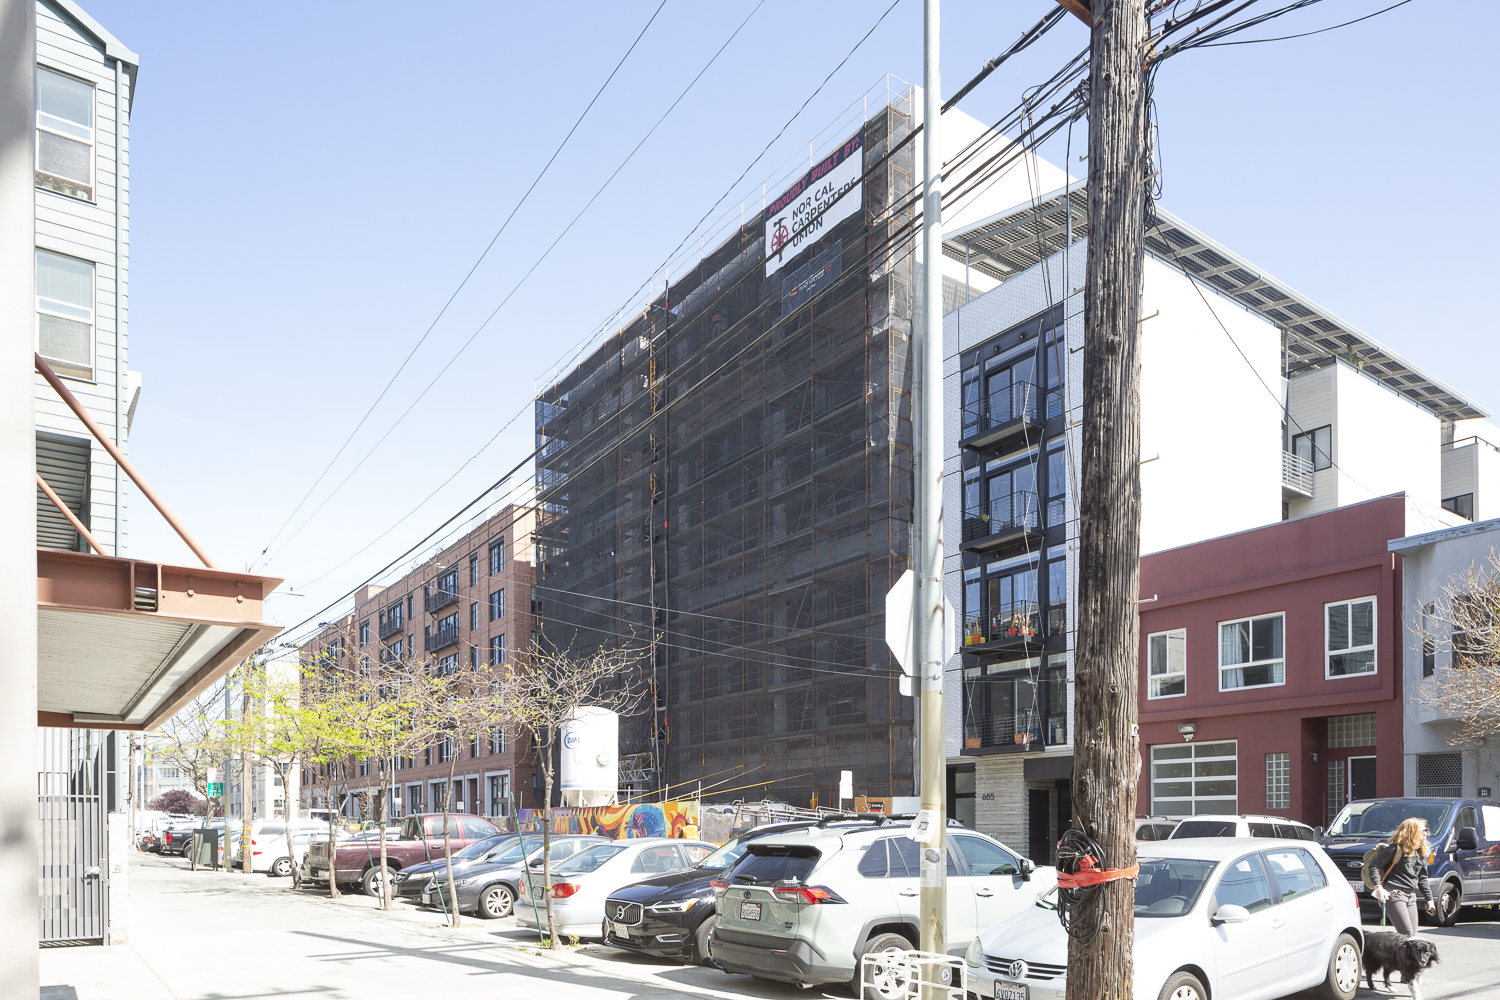 681 Florida Street facade obscured by scaffolding, image by Andrew Campbell Nelson